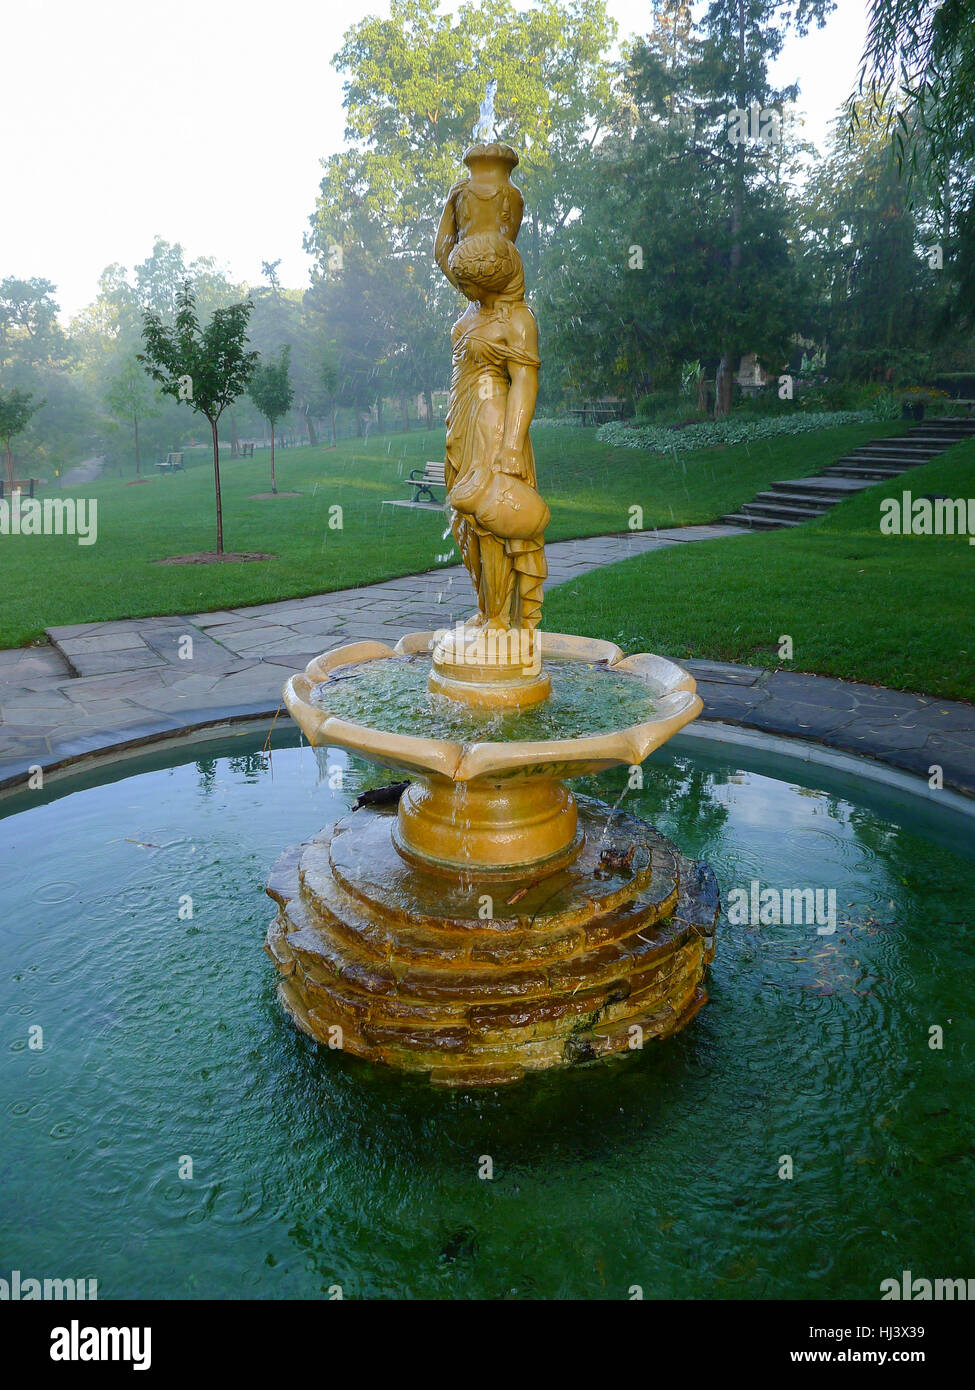 The well-known fountain unofficially named 'Rebecca' in Edwards Gardens, a public park and garden in Toronto Ontario Canada Stock Photo